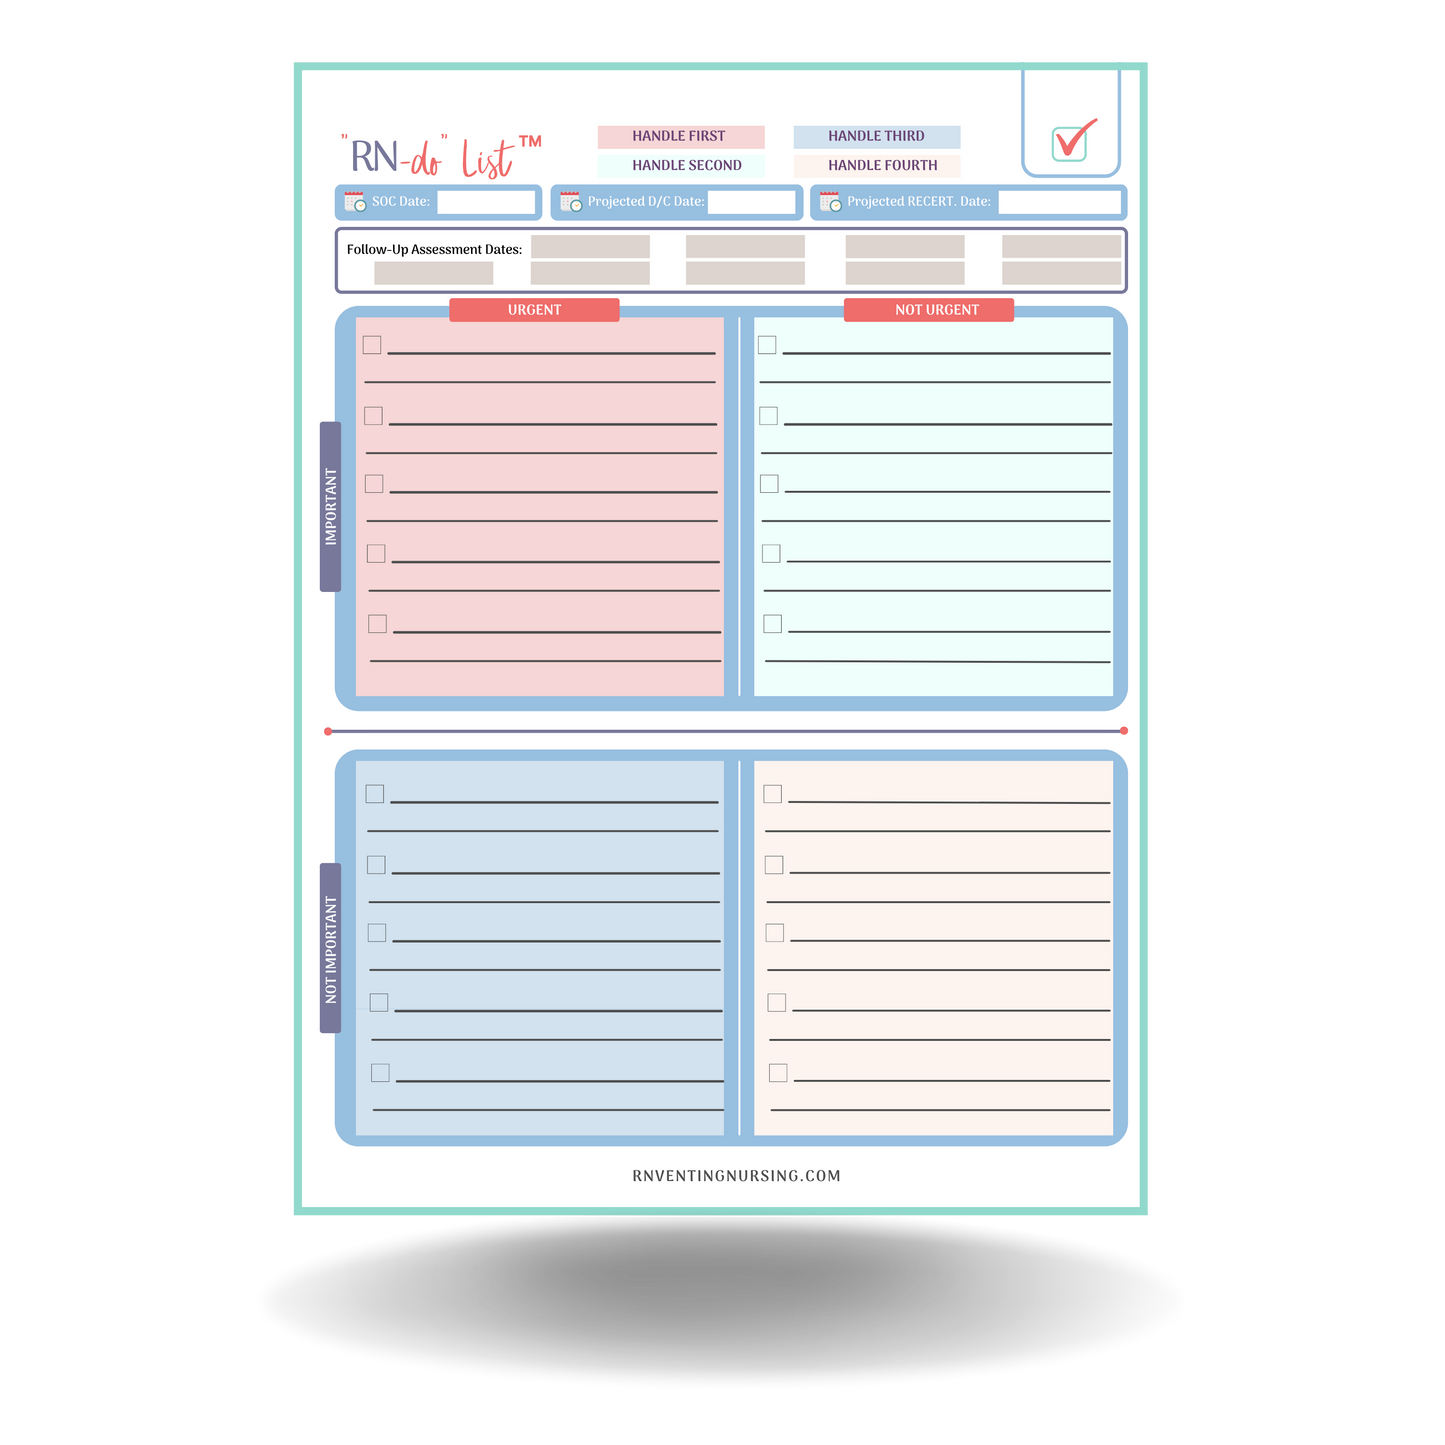 A priority matrix to help Home Care Nurses decide which tasks and patients need to be seen first.